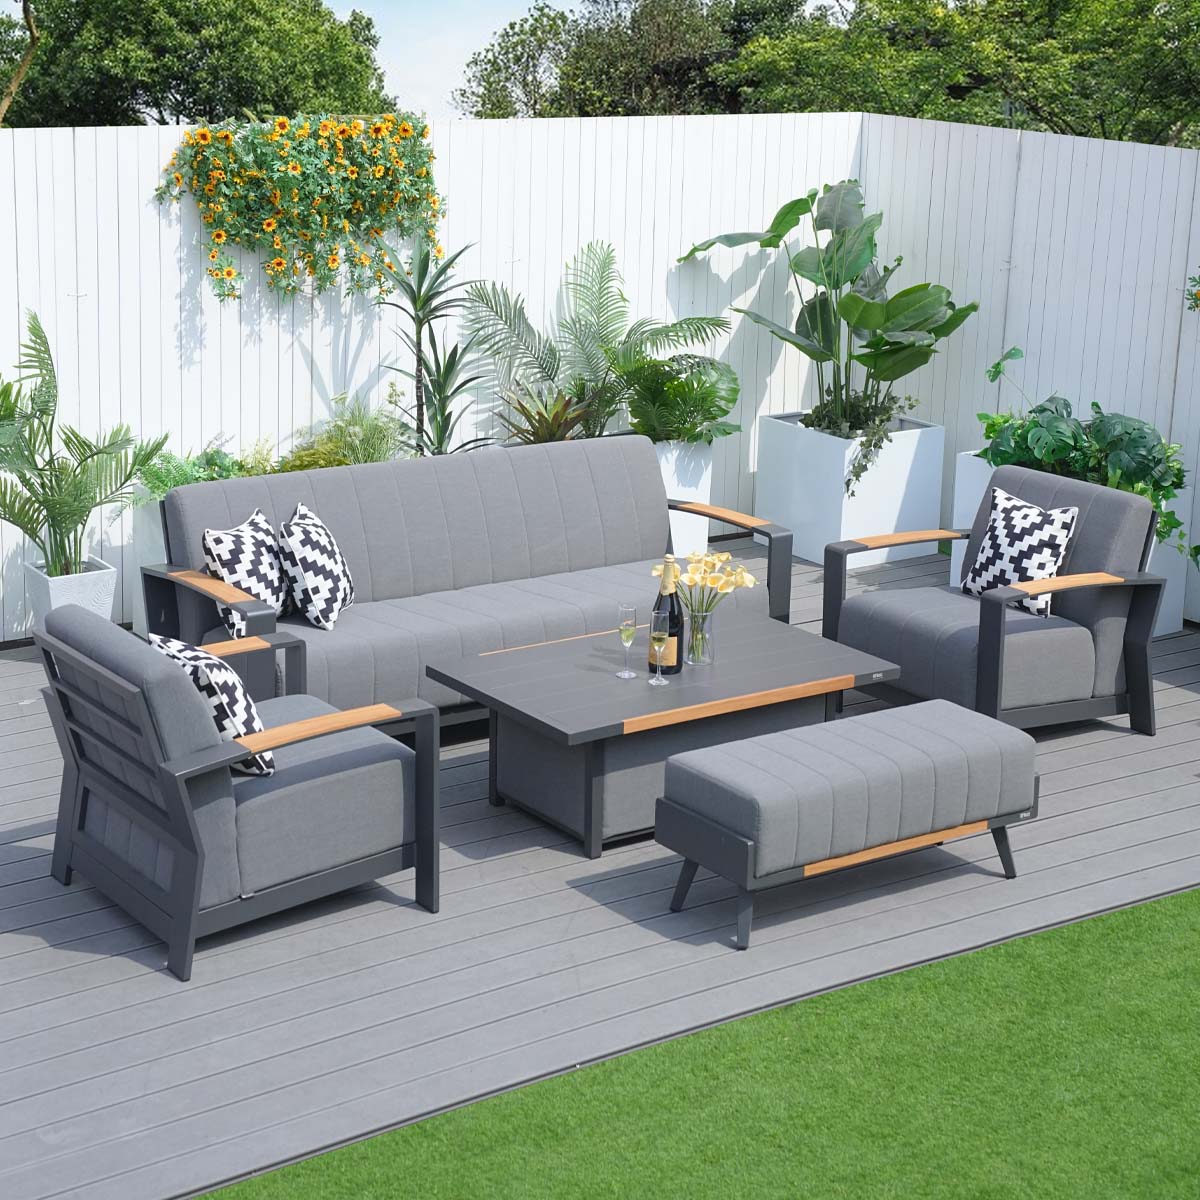 The Evolution and Future of the Outdoor Furniture Industry